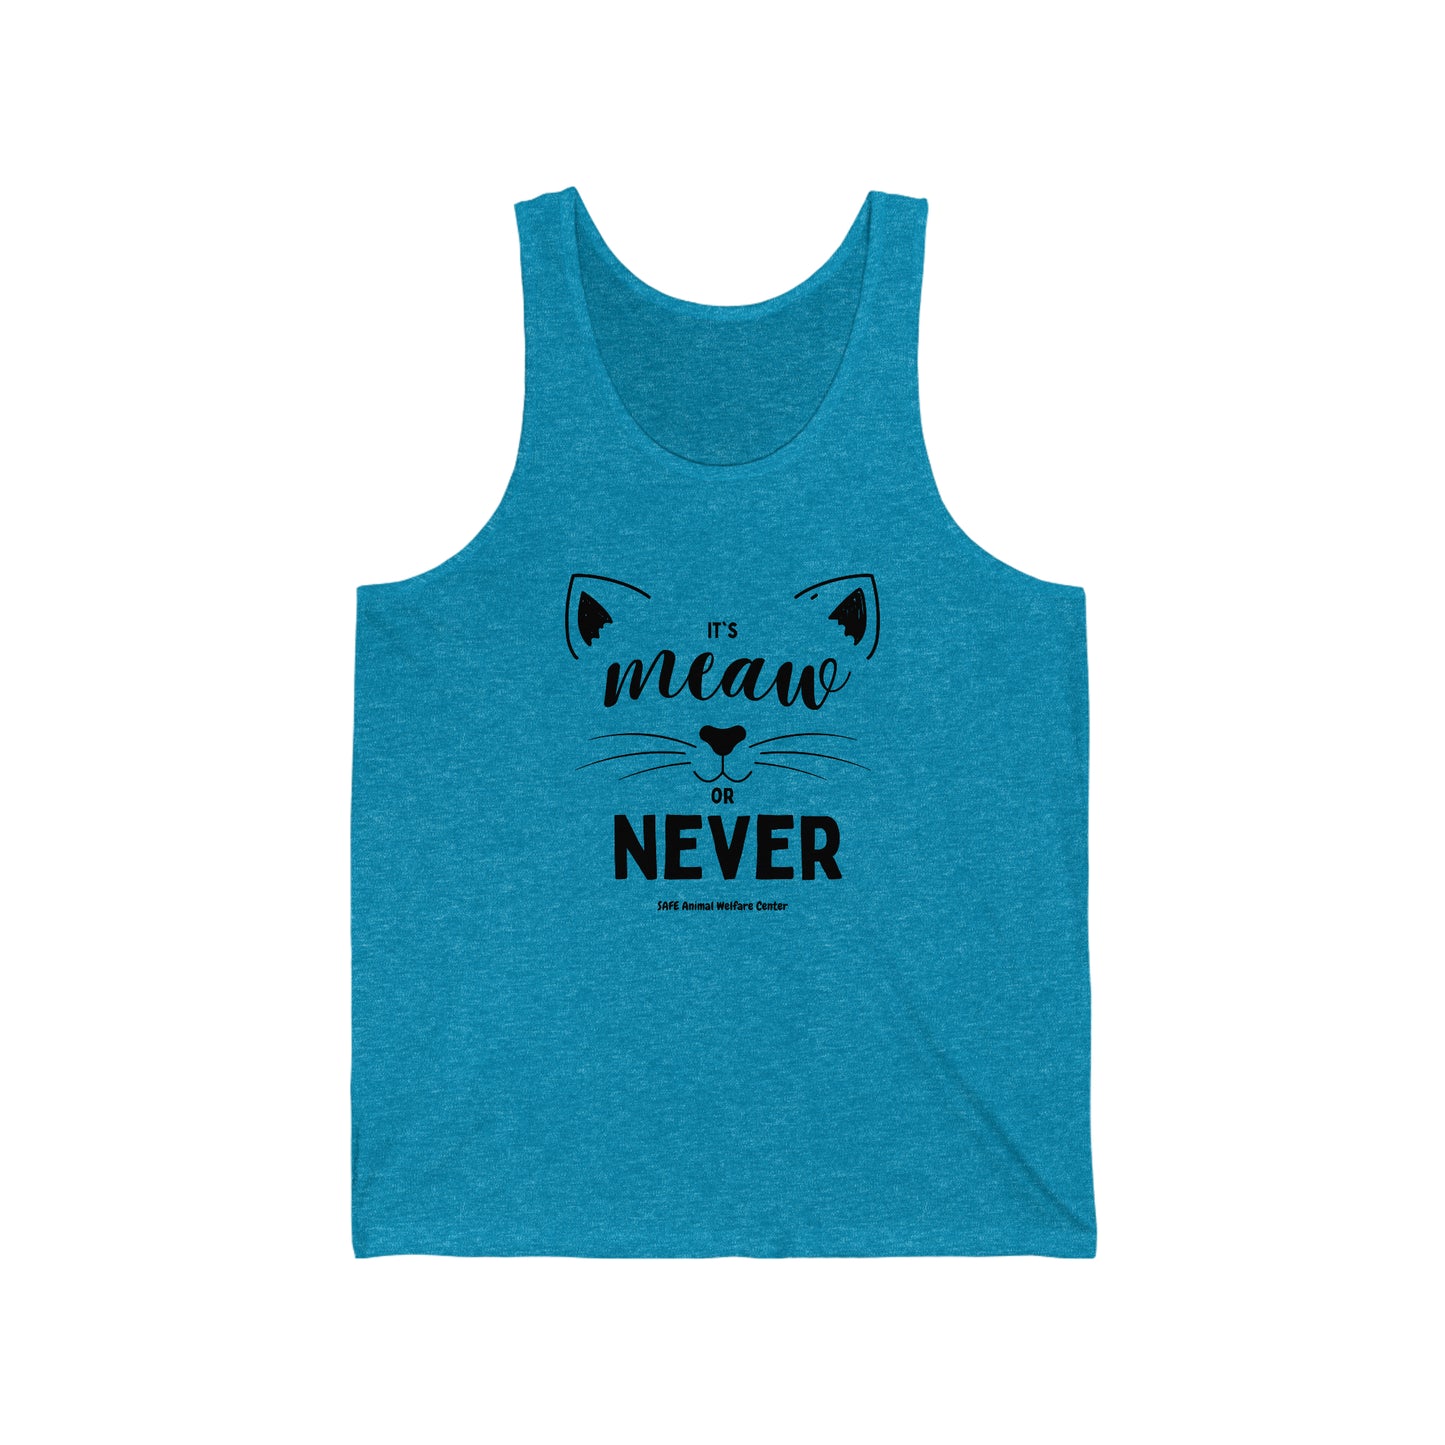 Meow or Never Unisex Jersey Tank